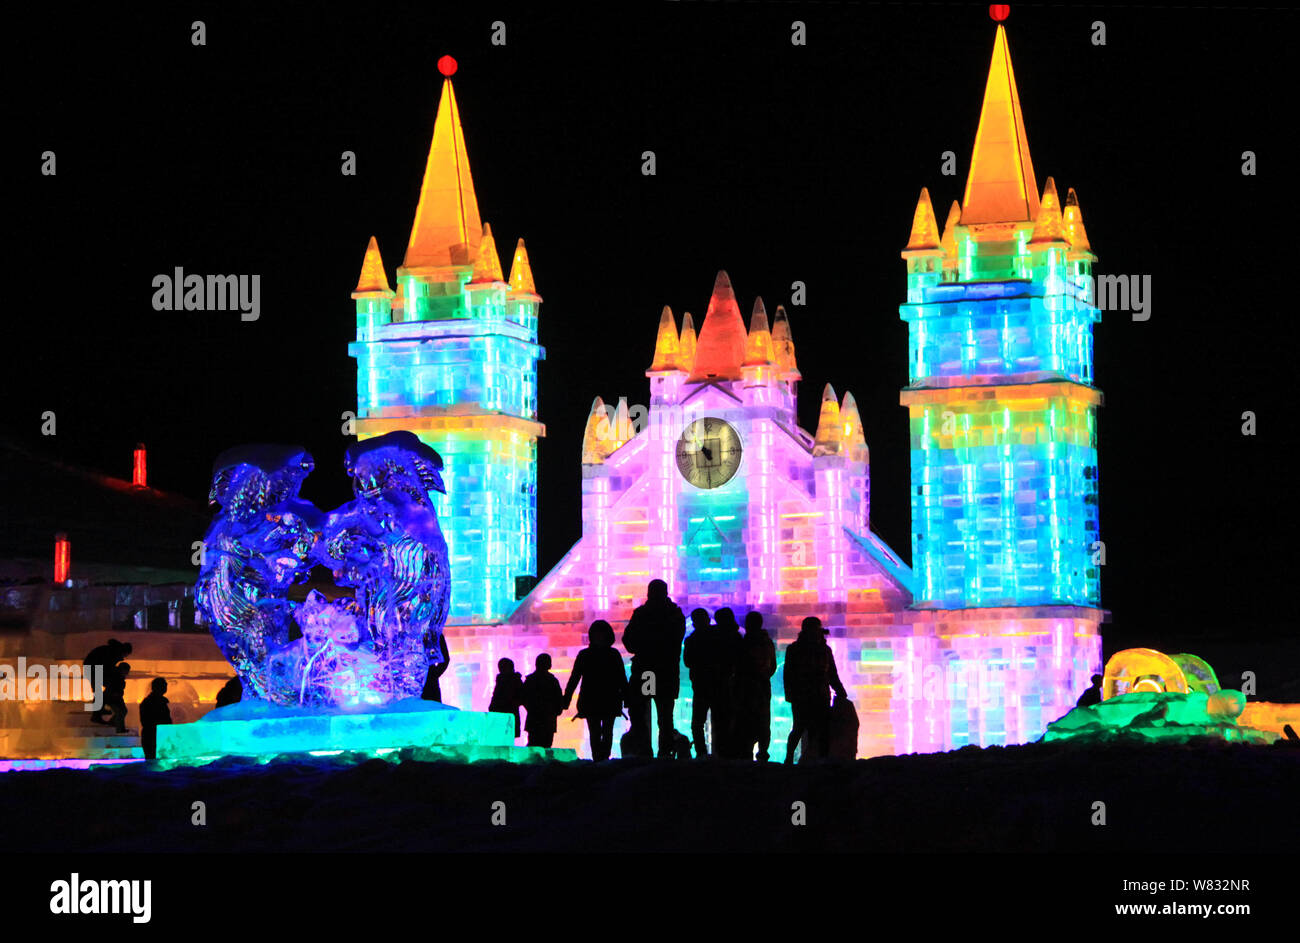 View of illuminated ice sculptures in the Altay Ice and Snow World in Altay city, Ili Kazakh Autonomous Prefecture, northwest China's Xinjiang Uygur A Stock Photo